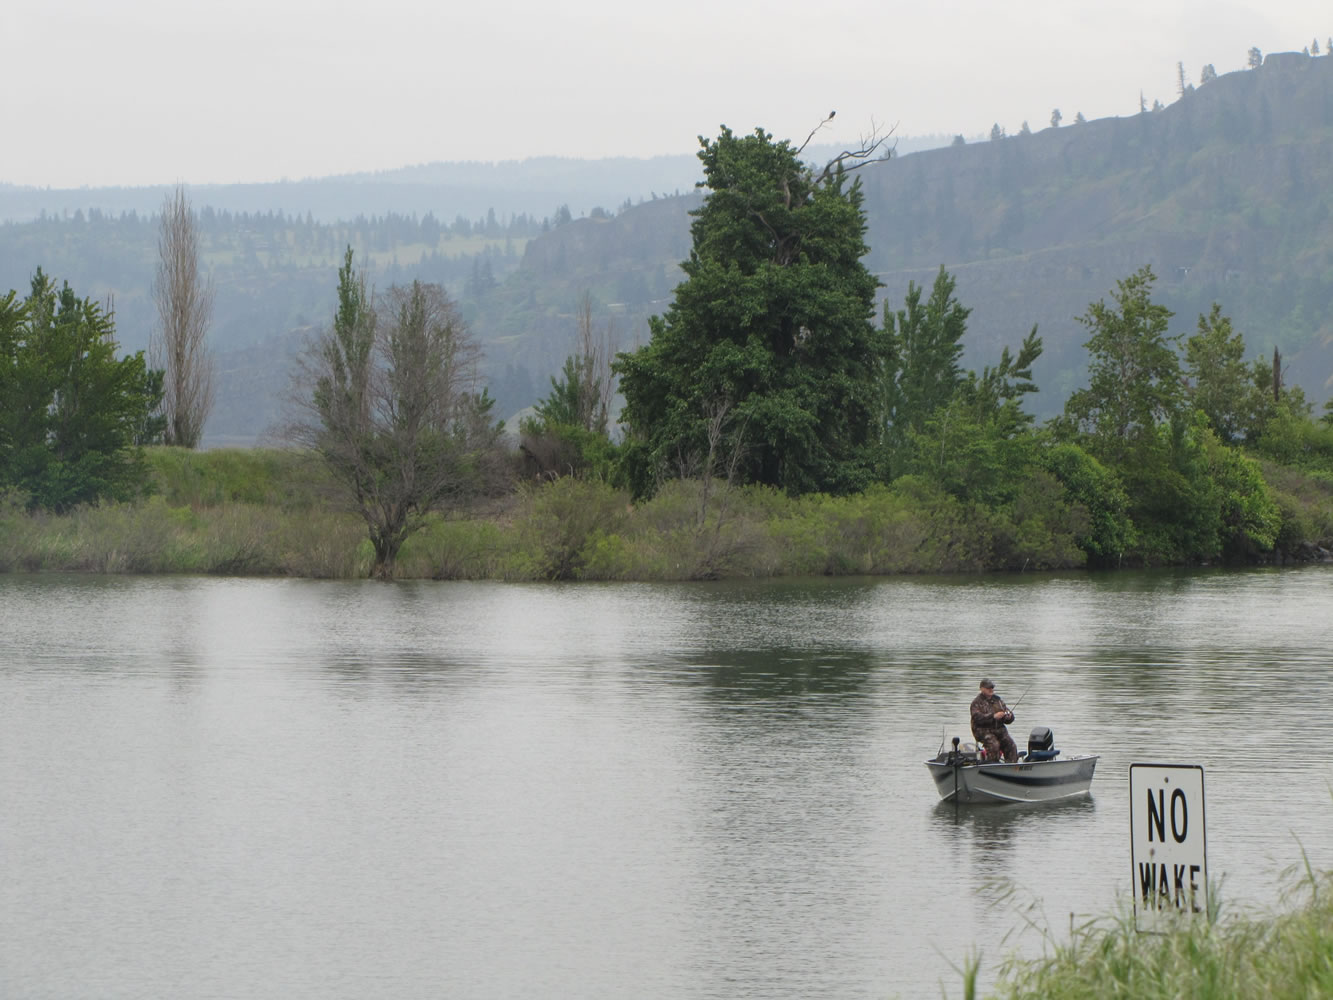 A bass angler tries his luck in a backwater of the Columbia River at Bingen in Klickitat County.